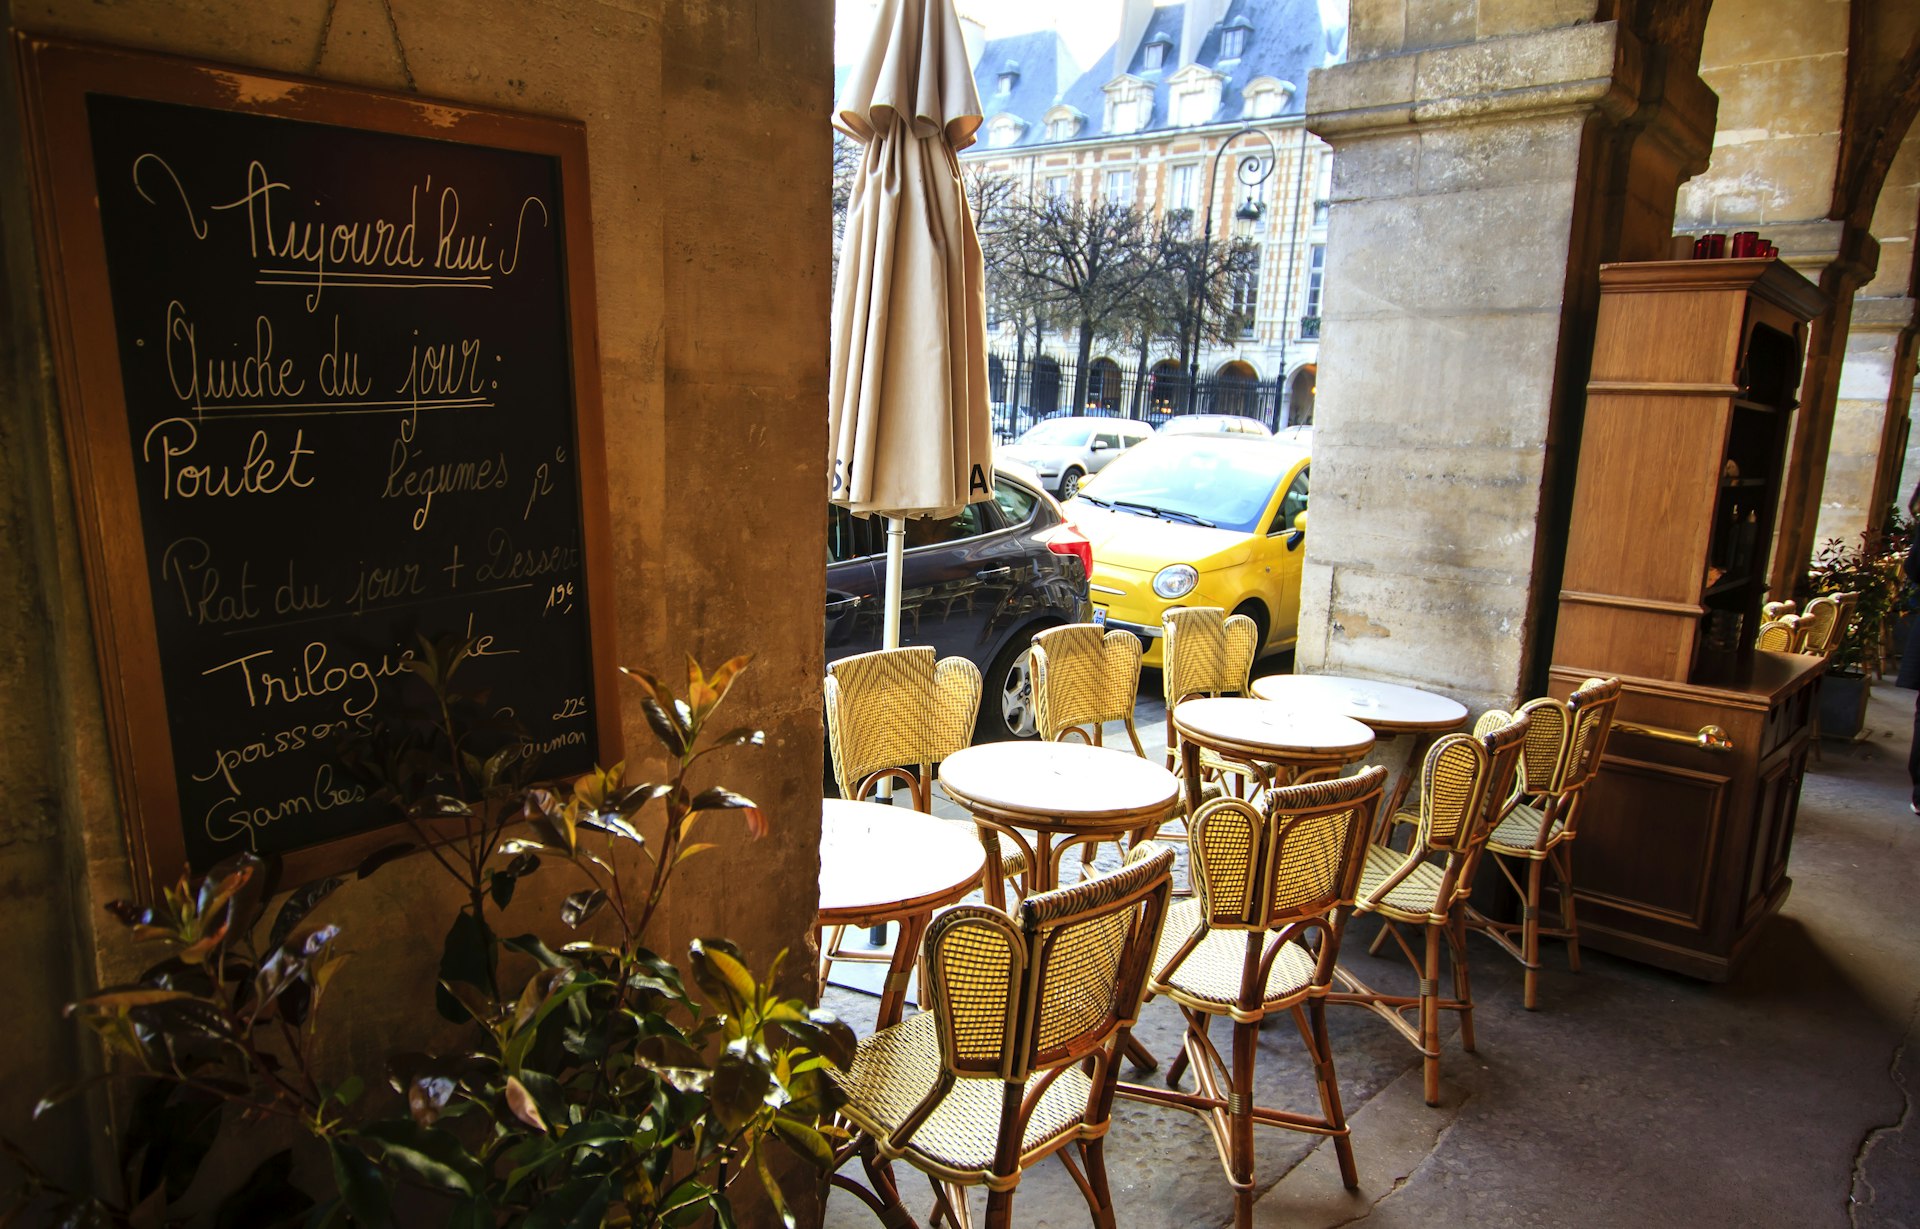 An empty pavement cafe with chairs and tables lined up between pillars. The blackboard menu is displayed on the wall